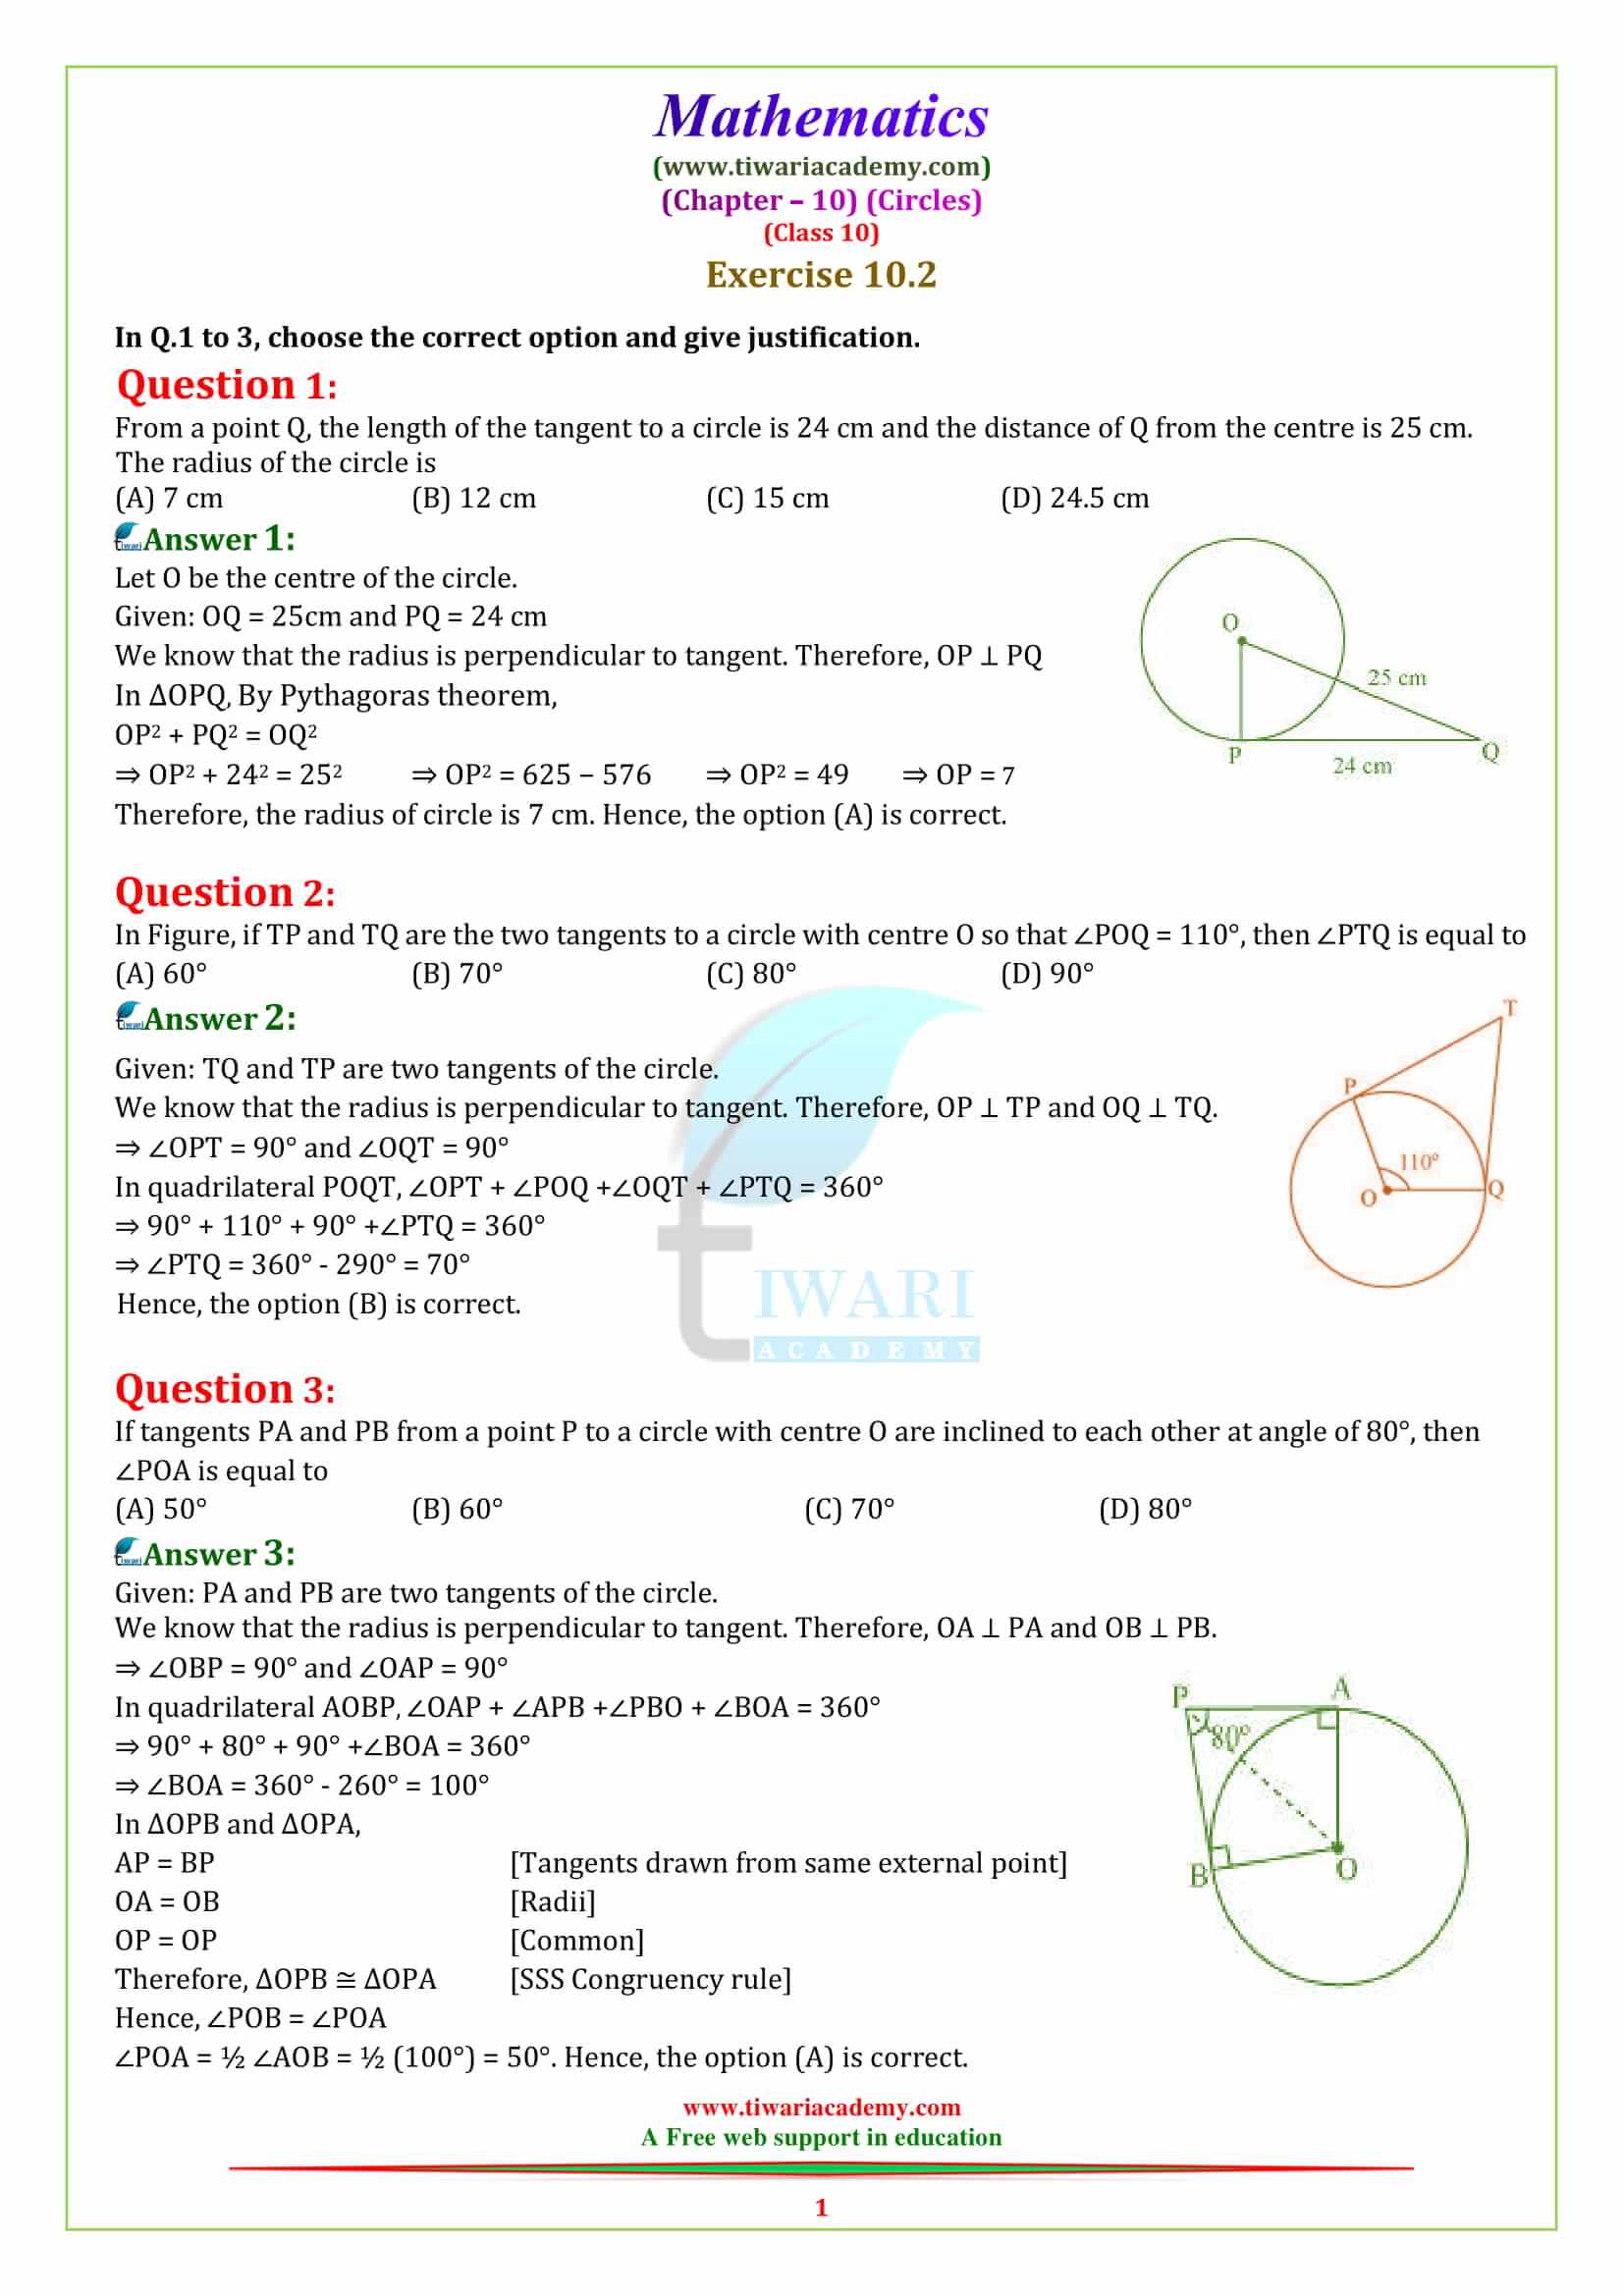 10 Maths Chapter 10 Exercise 10.2